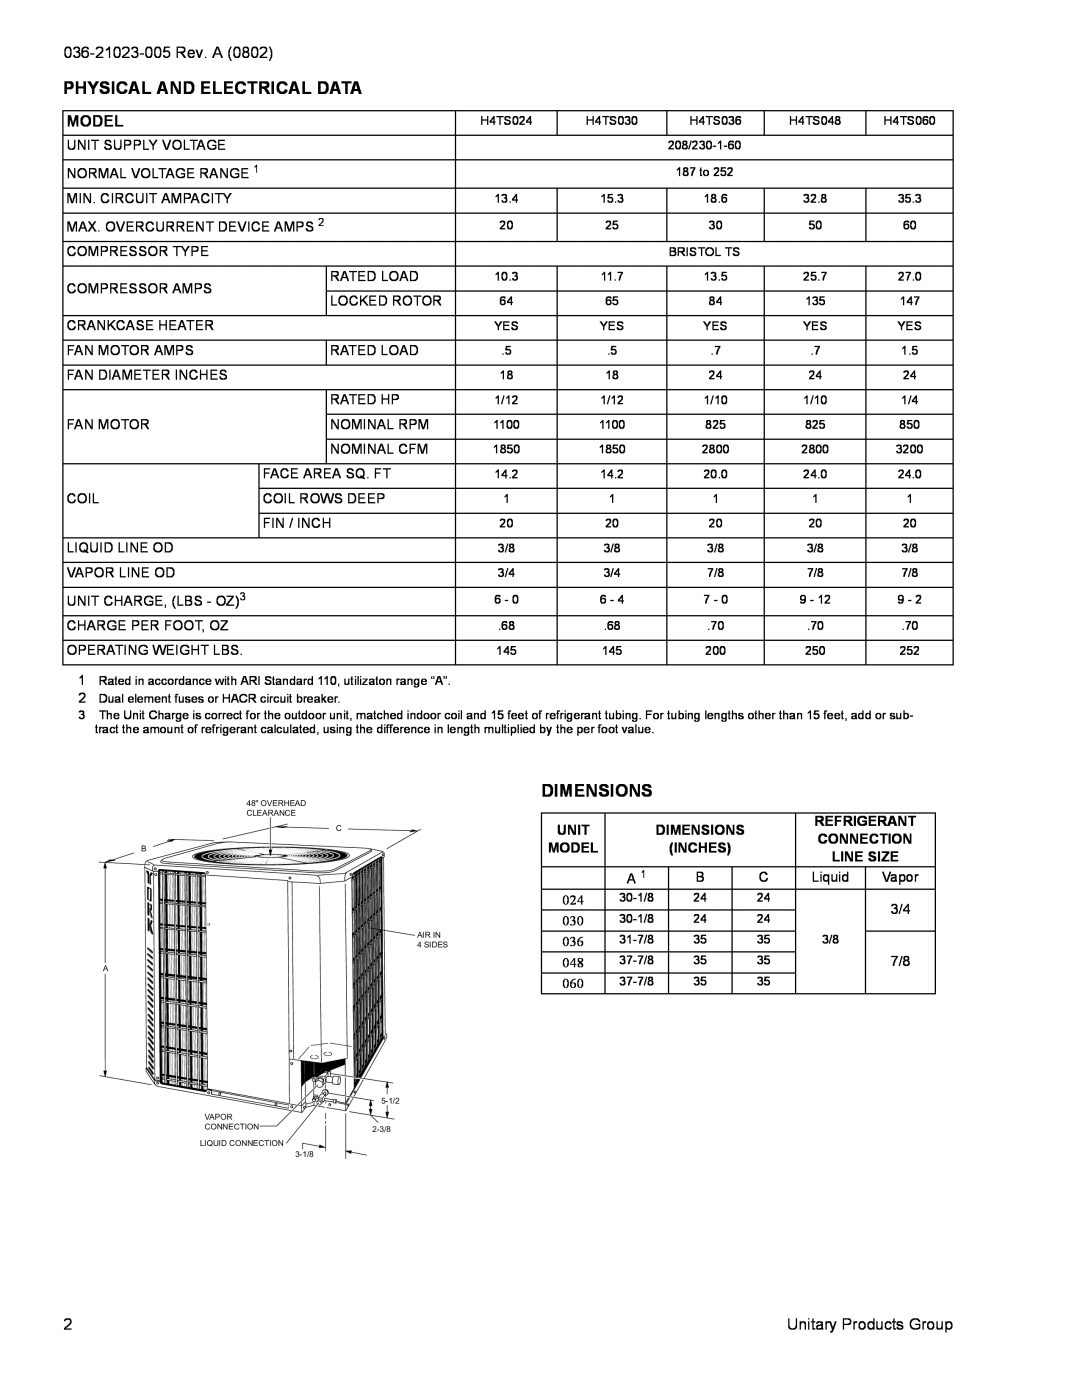 York H4TS024 warranty Physical And Electrical Data, Dimensions, Model 